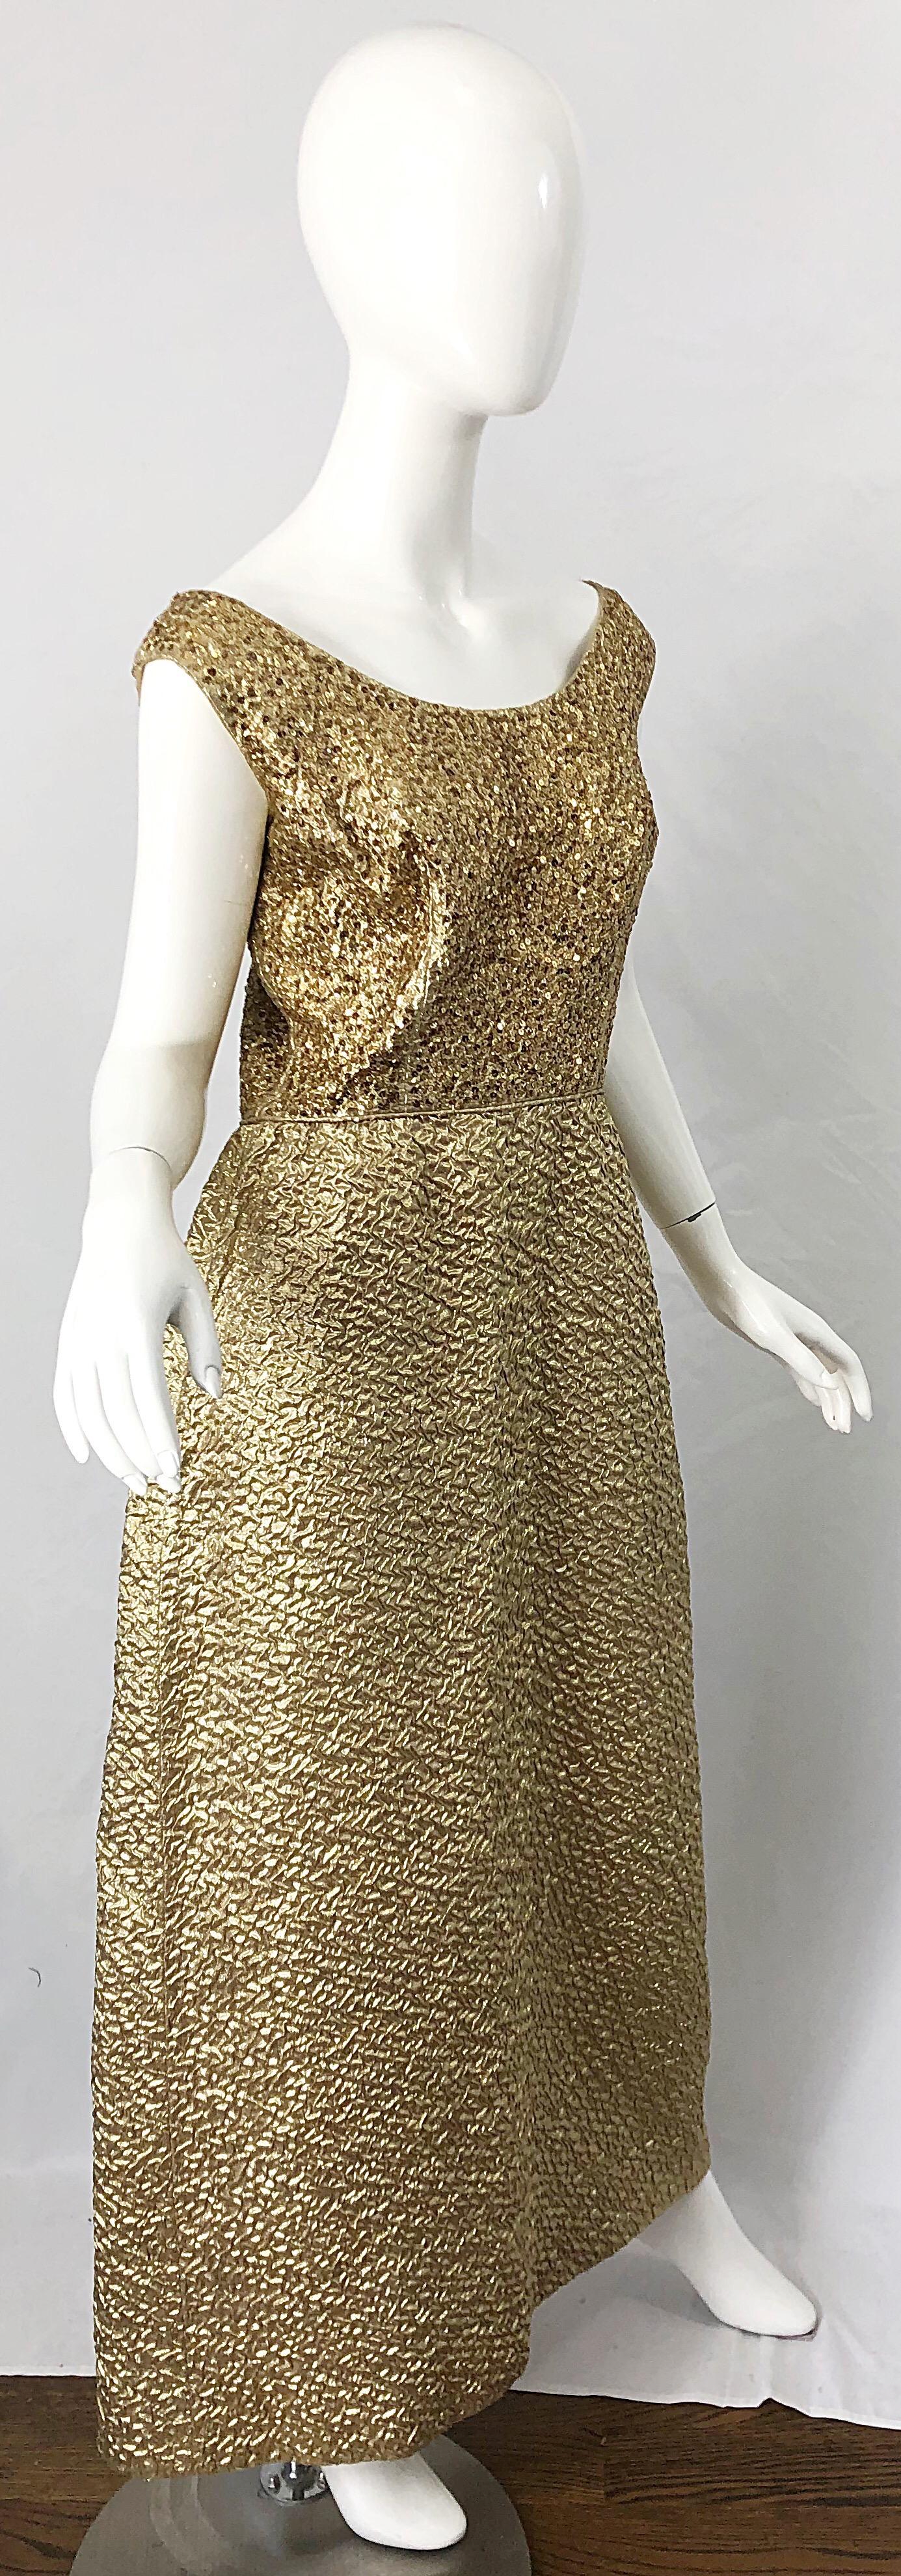 1960s Nat Kaplan Gold Sequin Rhinestone Encrusted Vintage 60s Evening Gown Dress For Sale 7